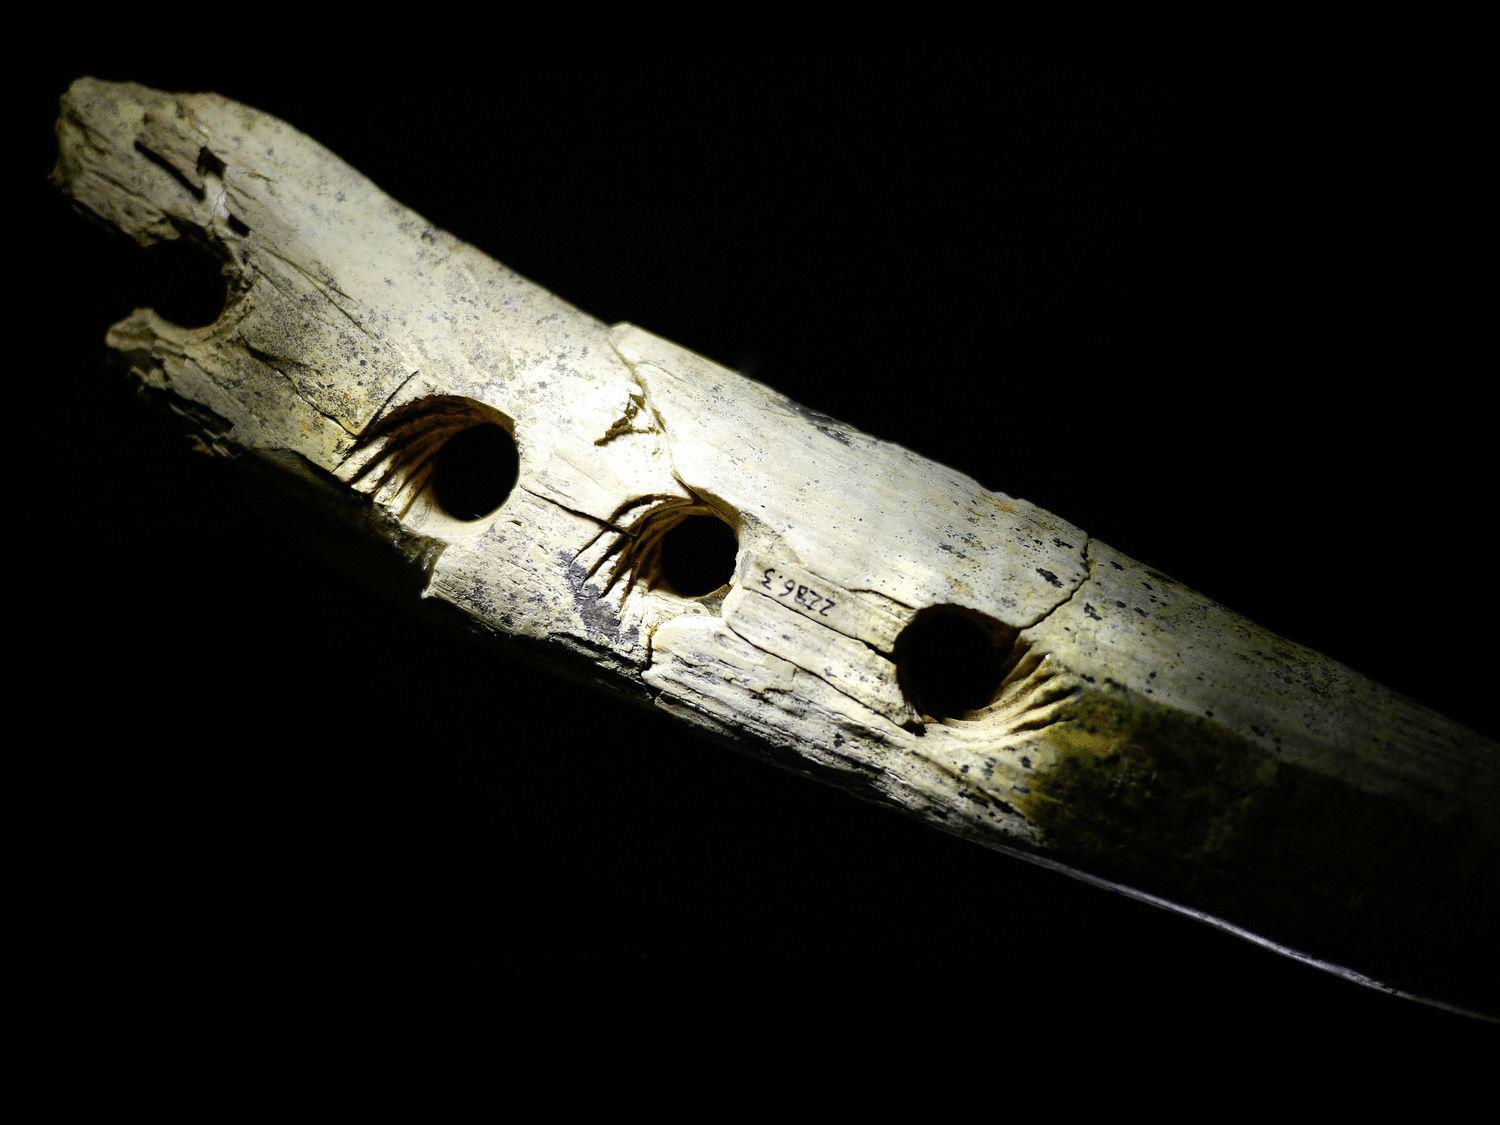 Ivory tool from 40,000 years ago sheds light on how hunter ...